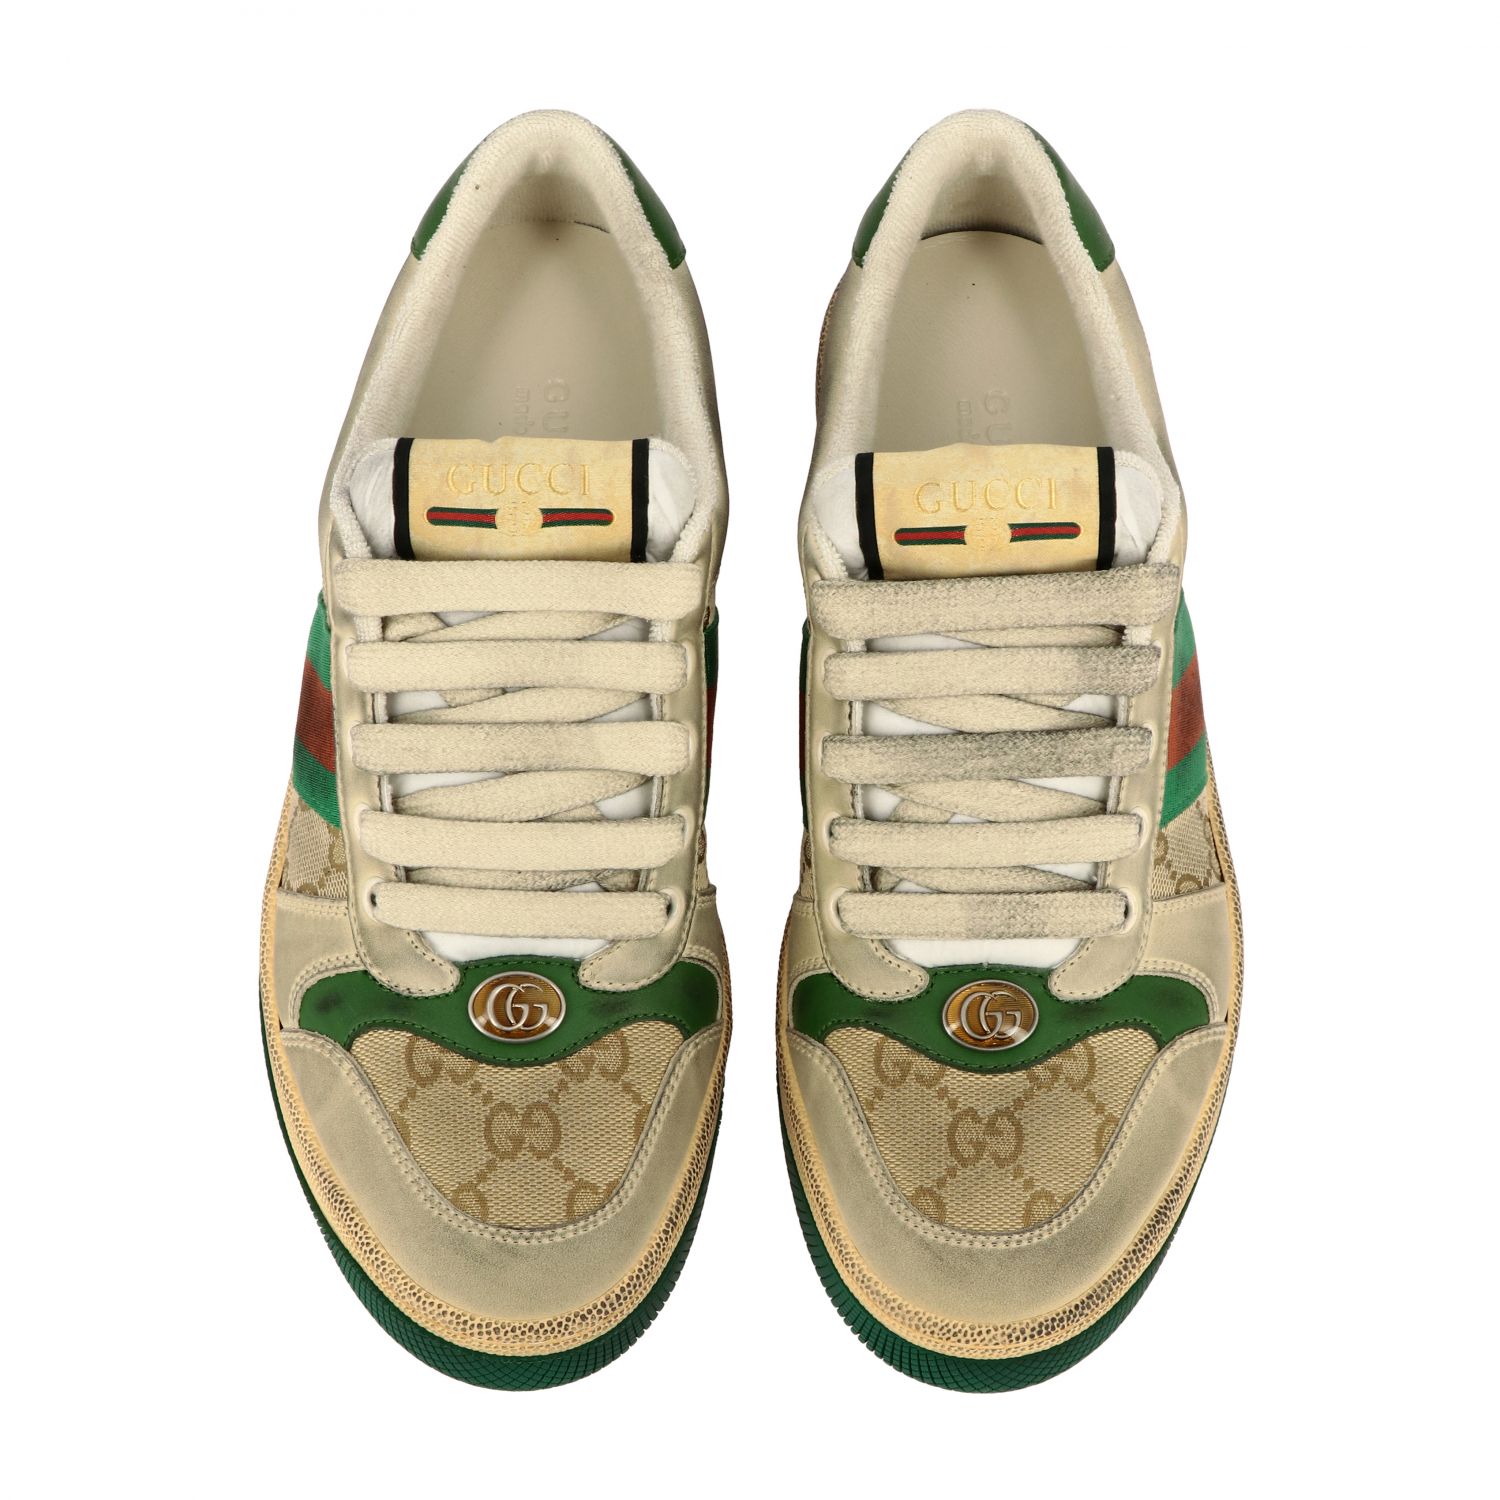 GUCCI Screener sneakers in GG Supreme canvas and leather with web